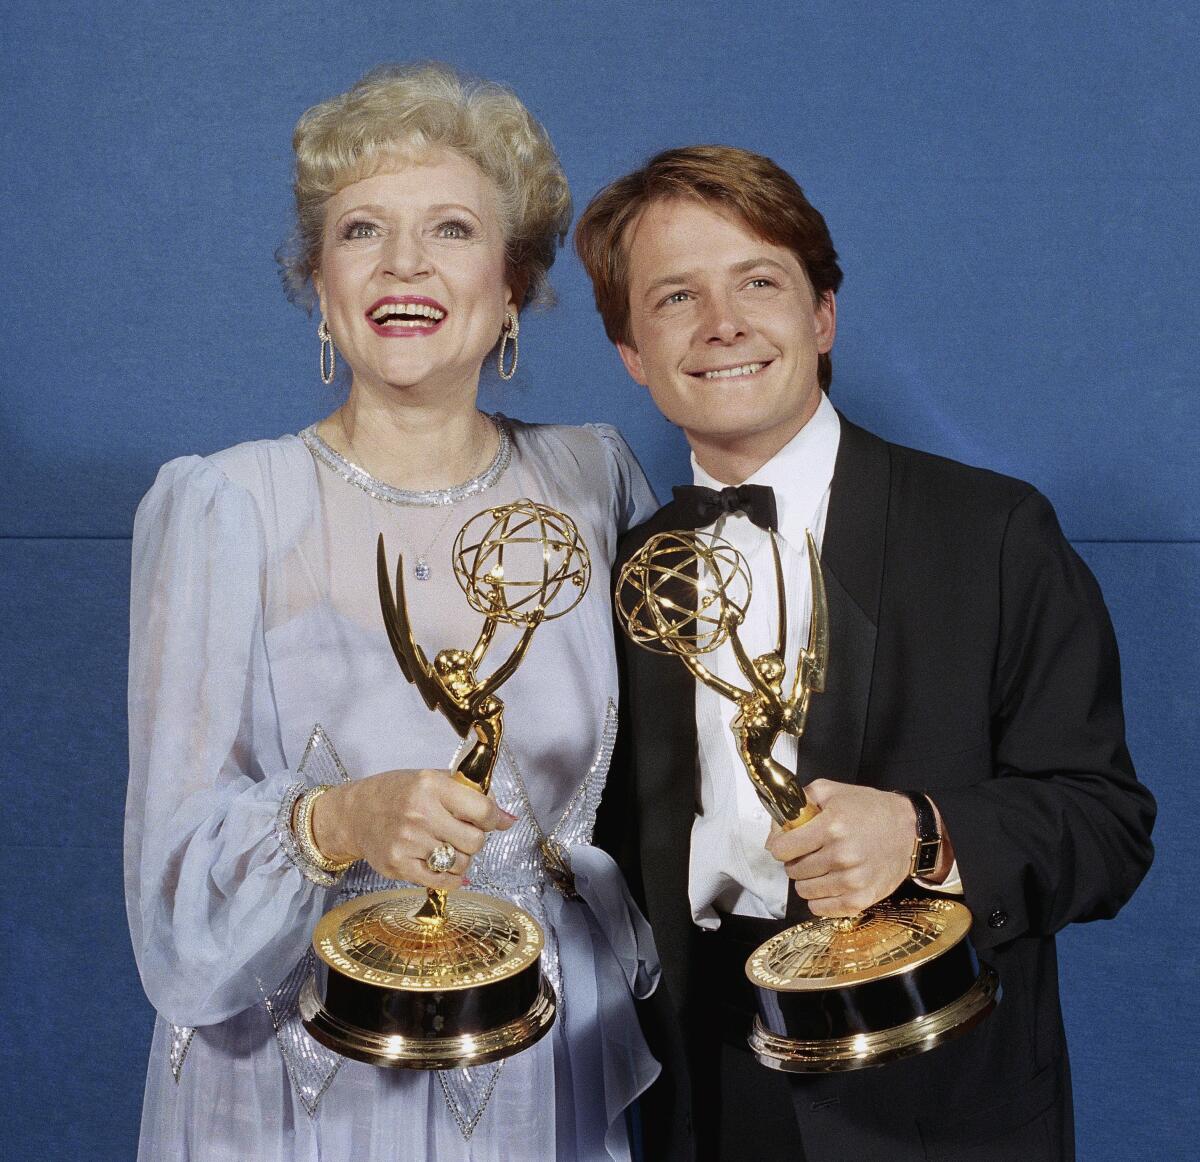 Michael J. Fox and Betty White pose together in 1986, each clutching an Emmy.